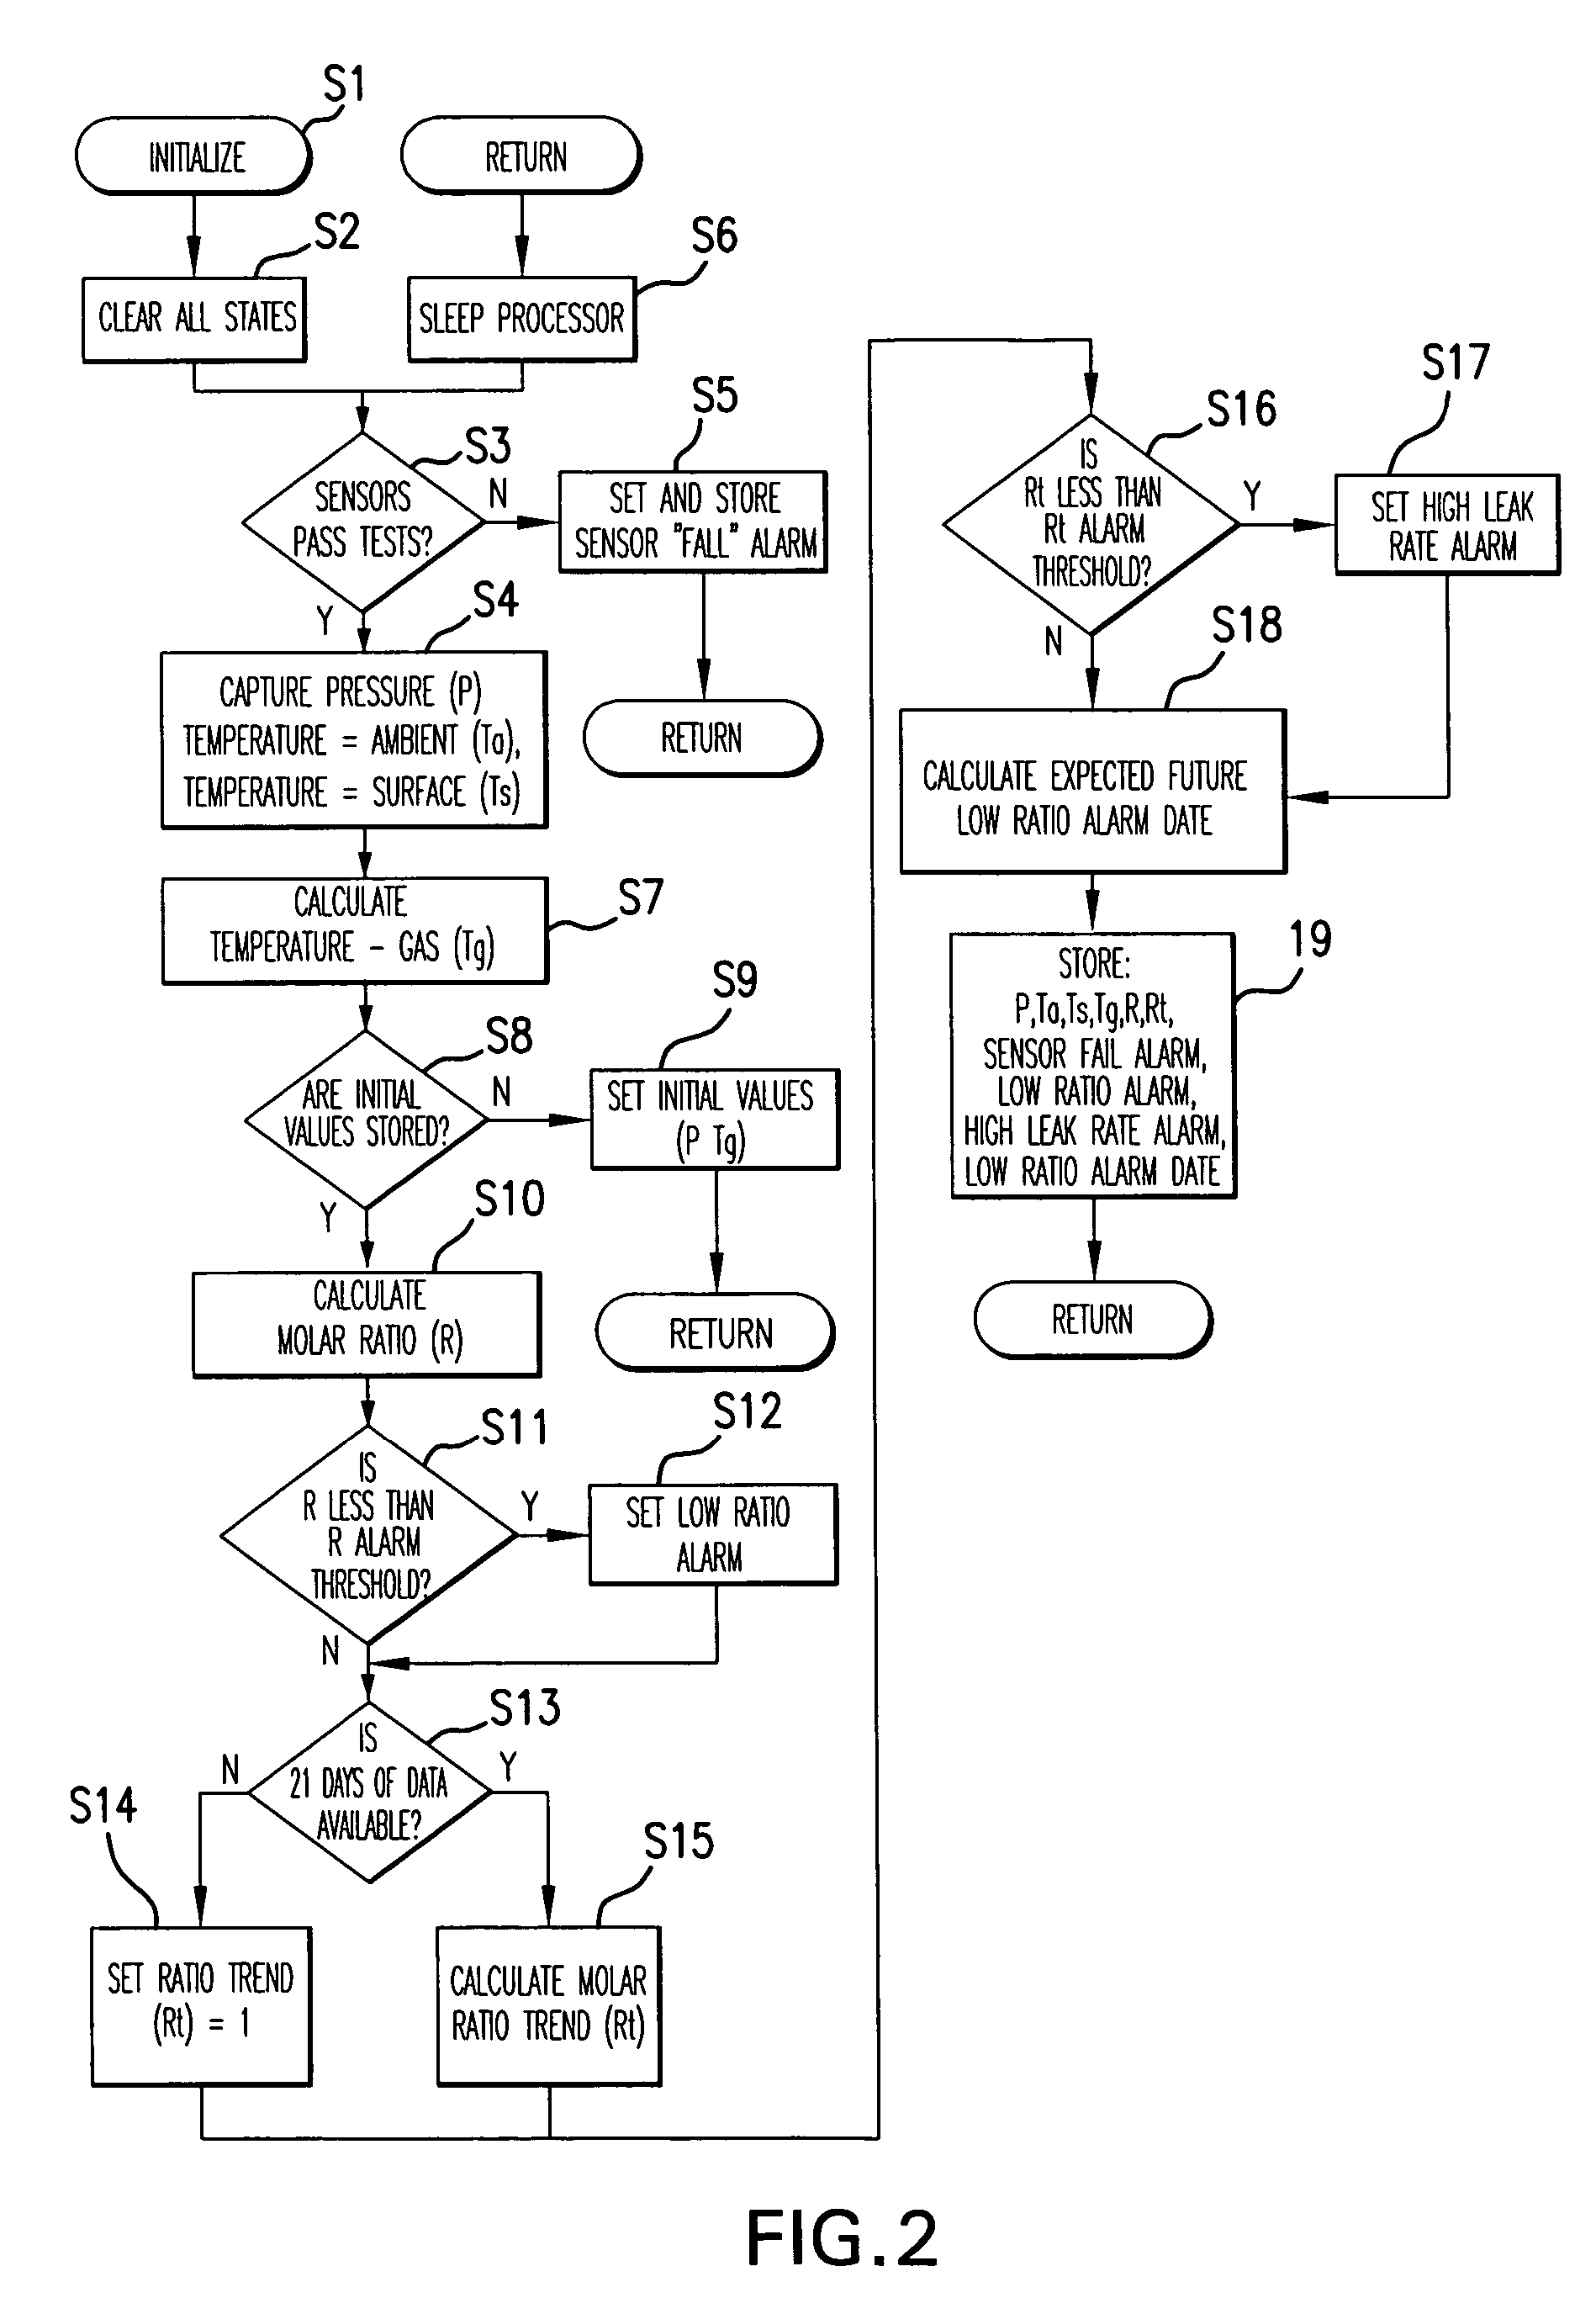 Method and apparatus for monitoring SF6 gas and electric utility apparatus